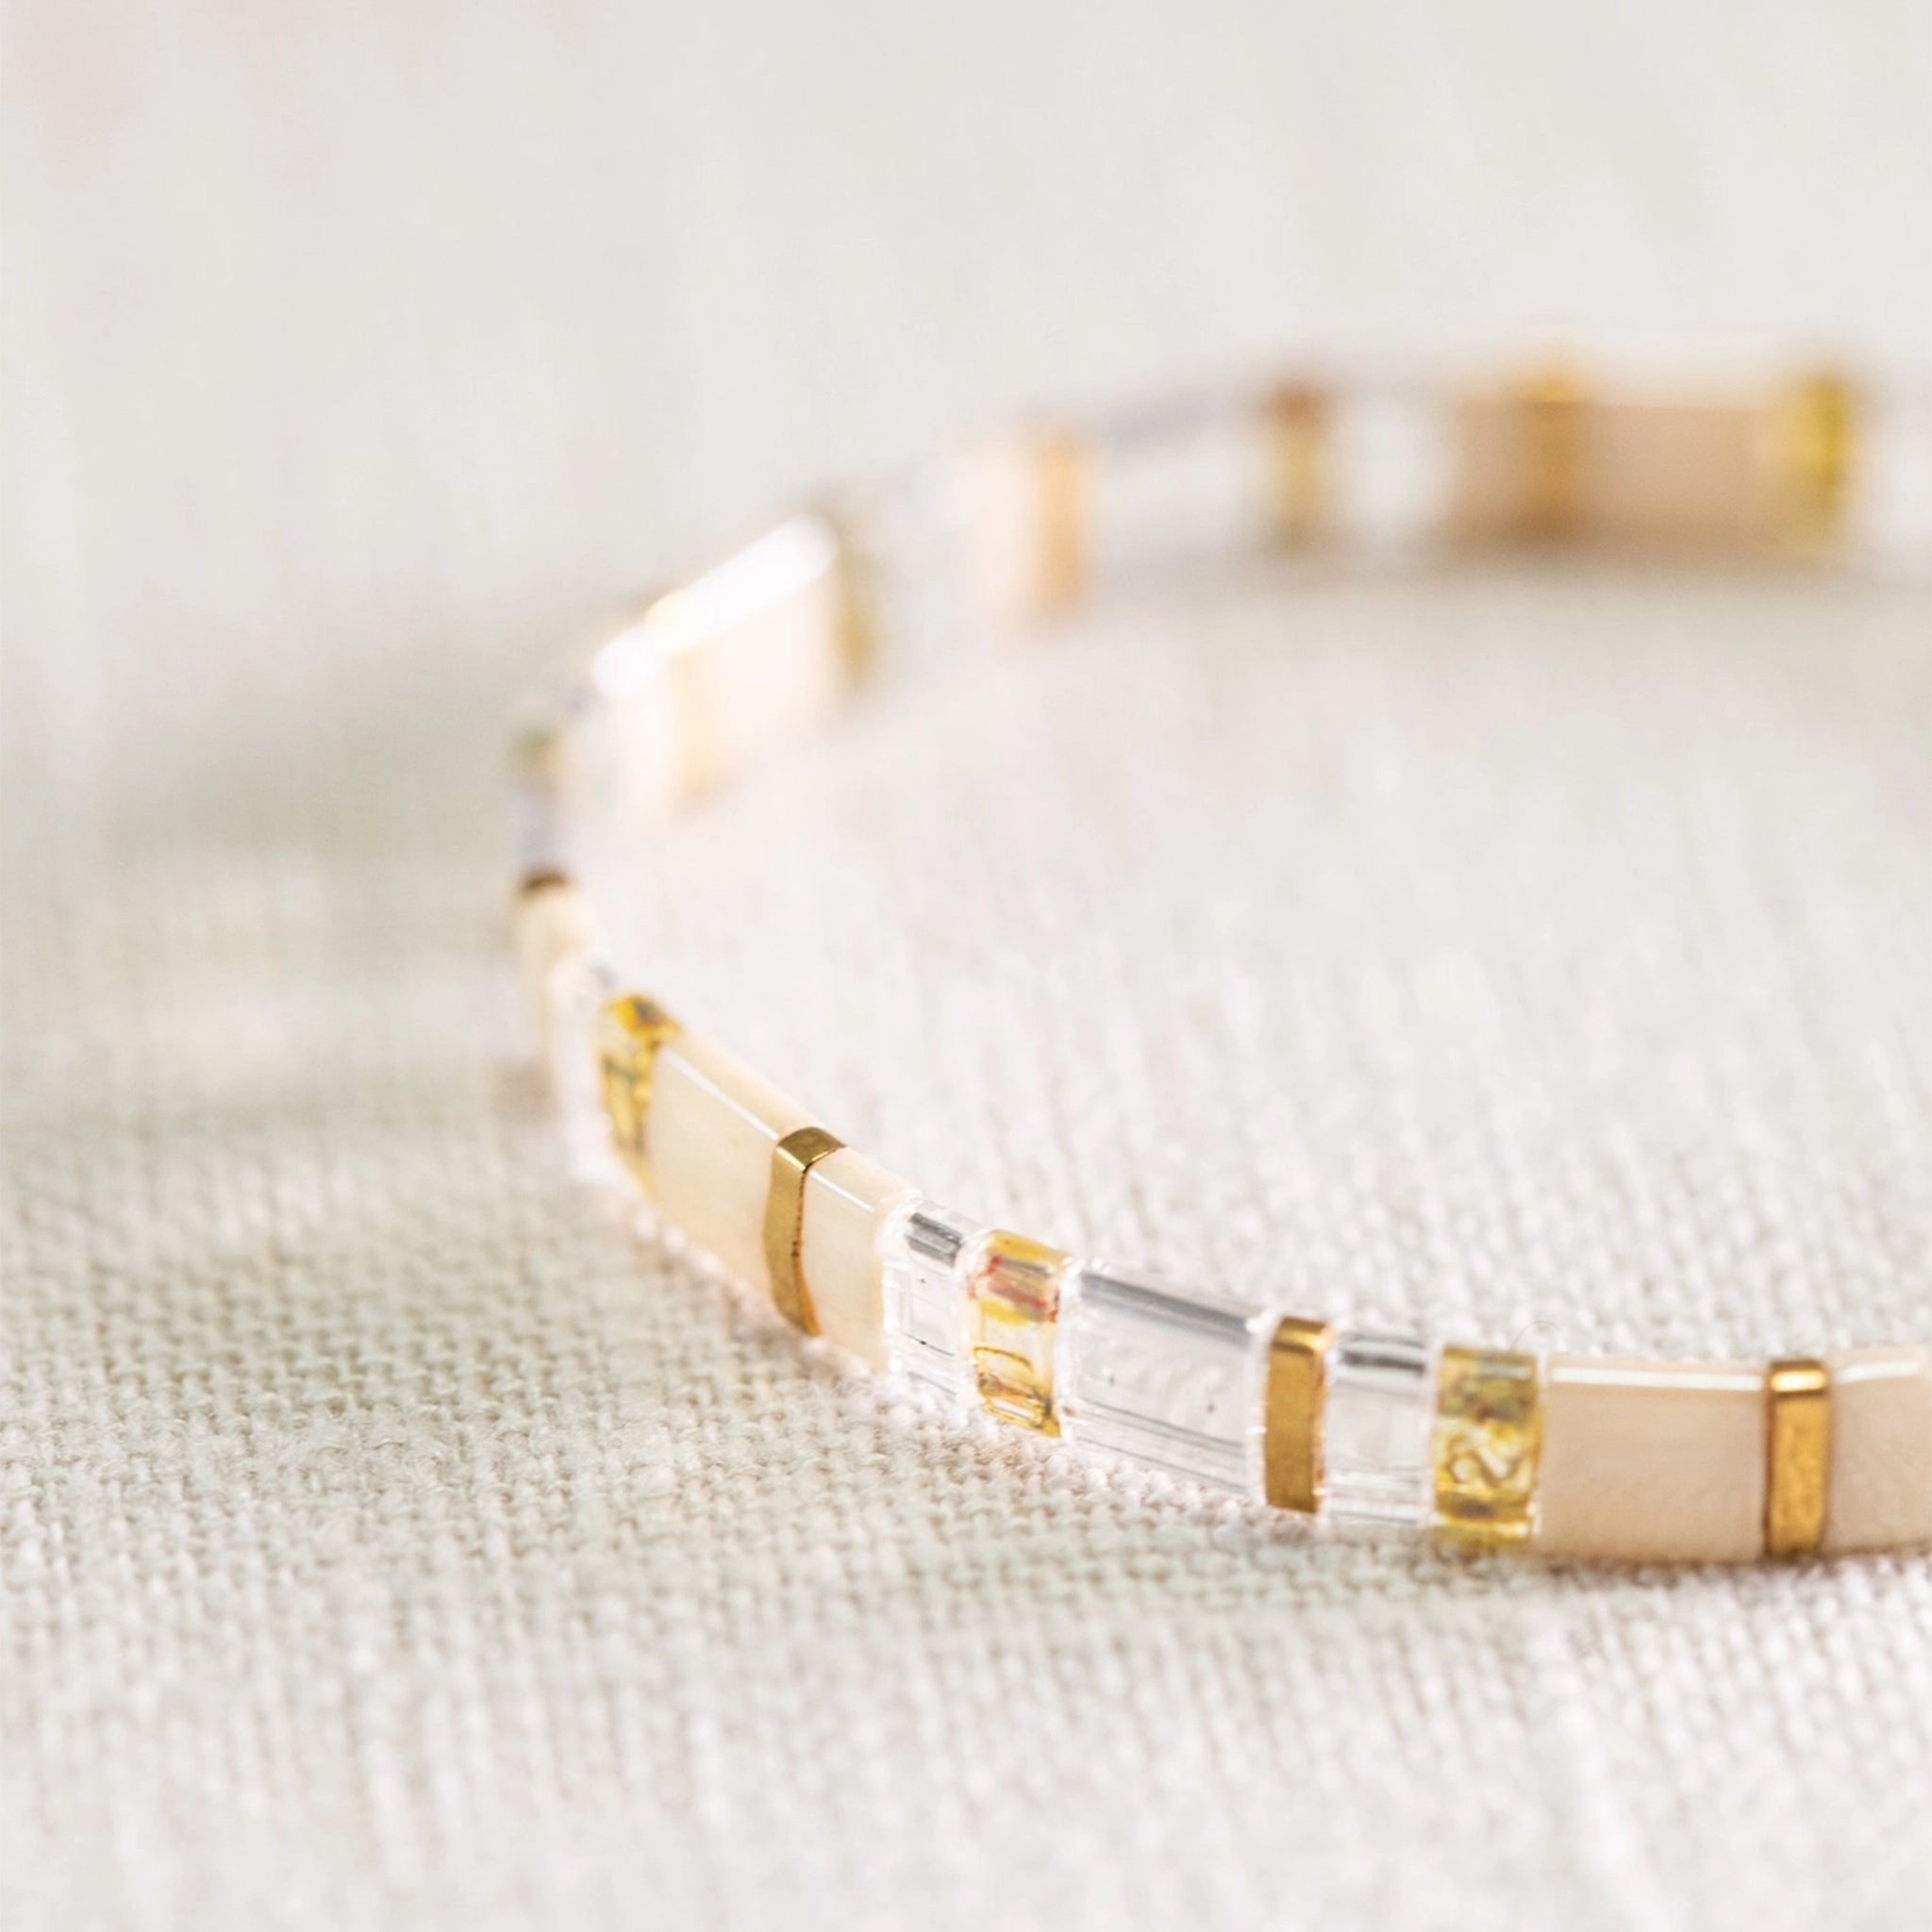 A gold, clear and neutral colored bracelet with a variation of alternating beads.